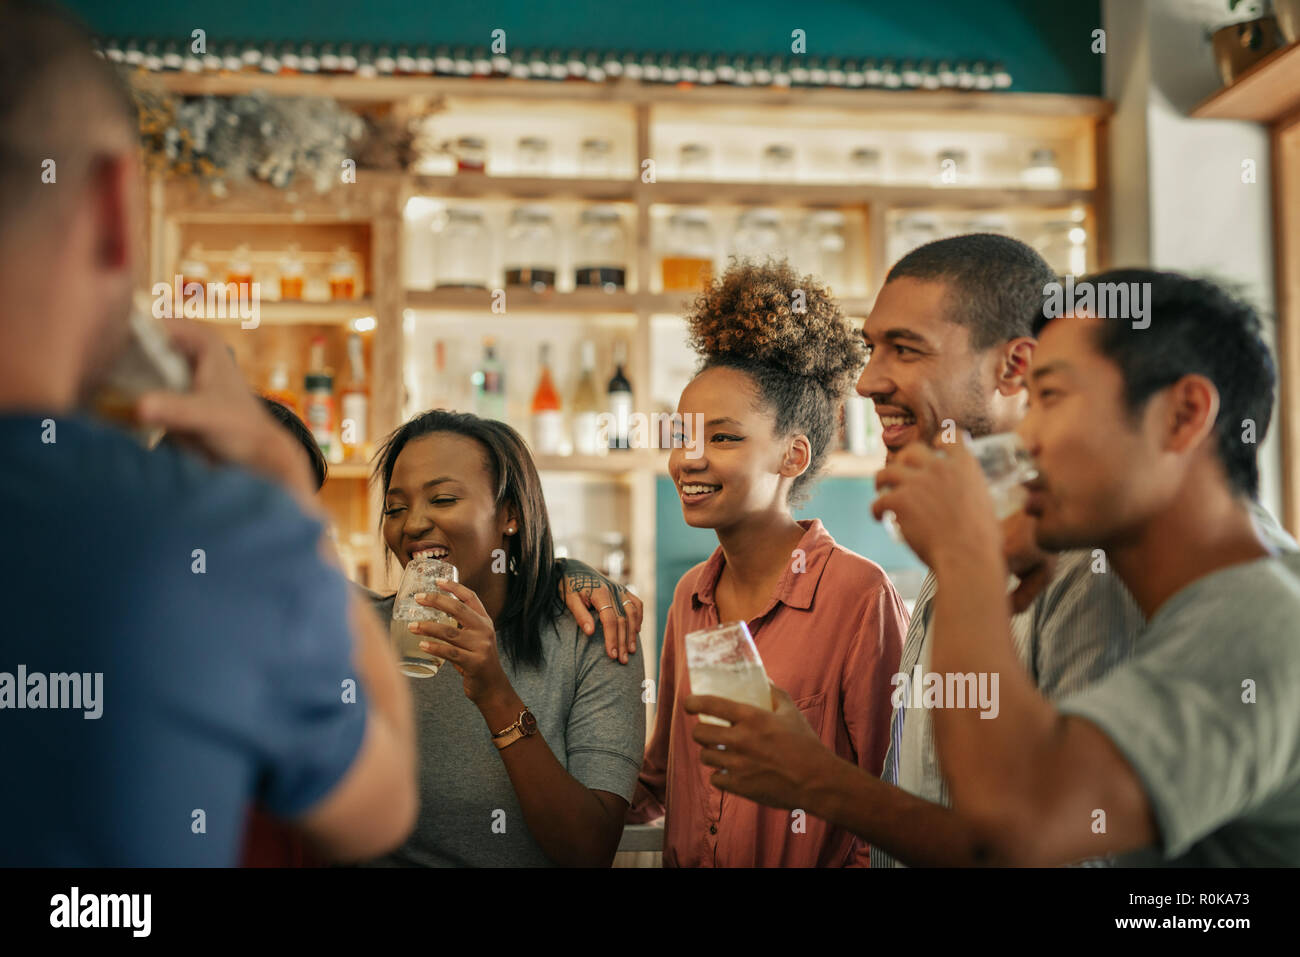 Diverse young friends hanging out together in a bar  Stock Photo